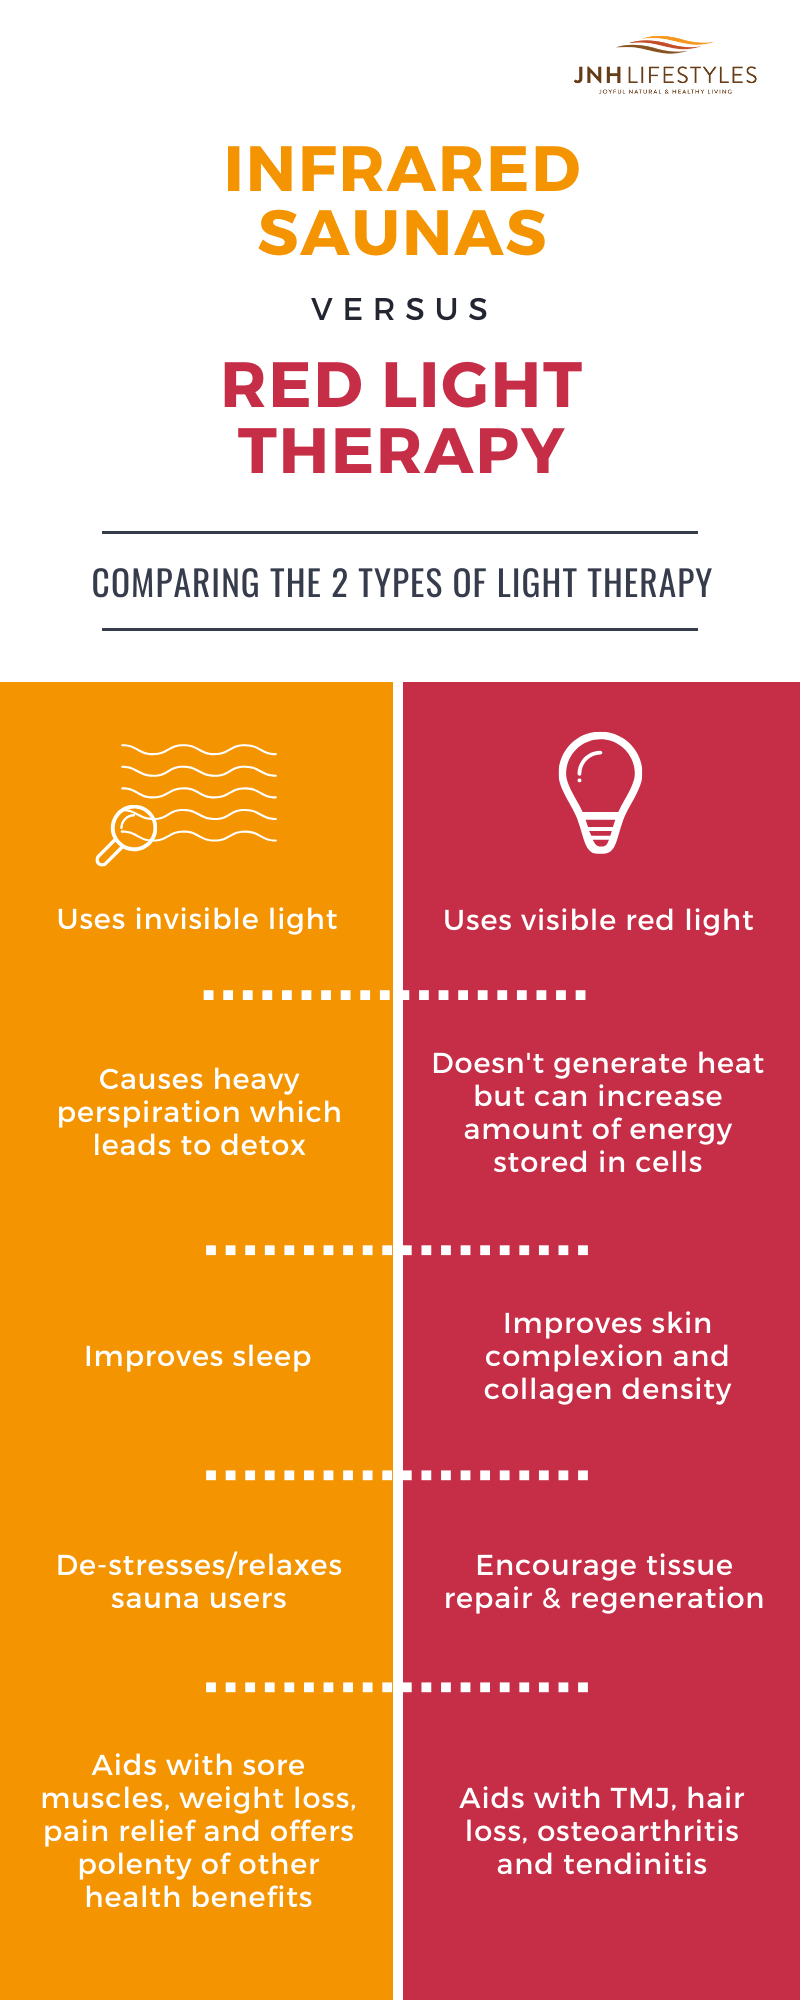 Where To Buy Red Light Therapy Lamps